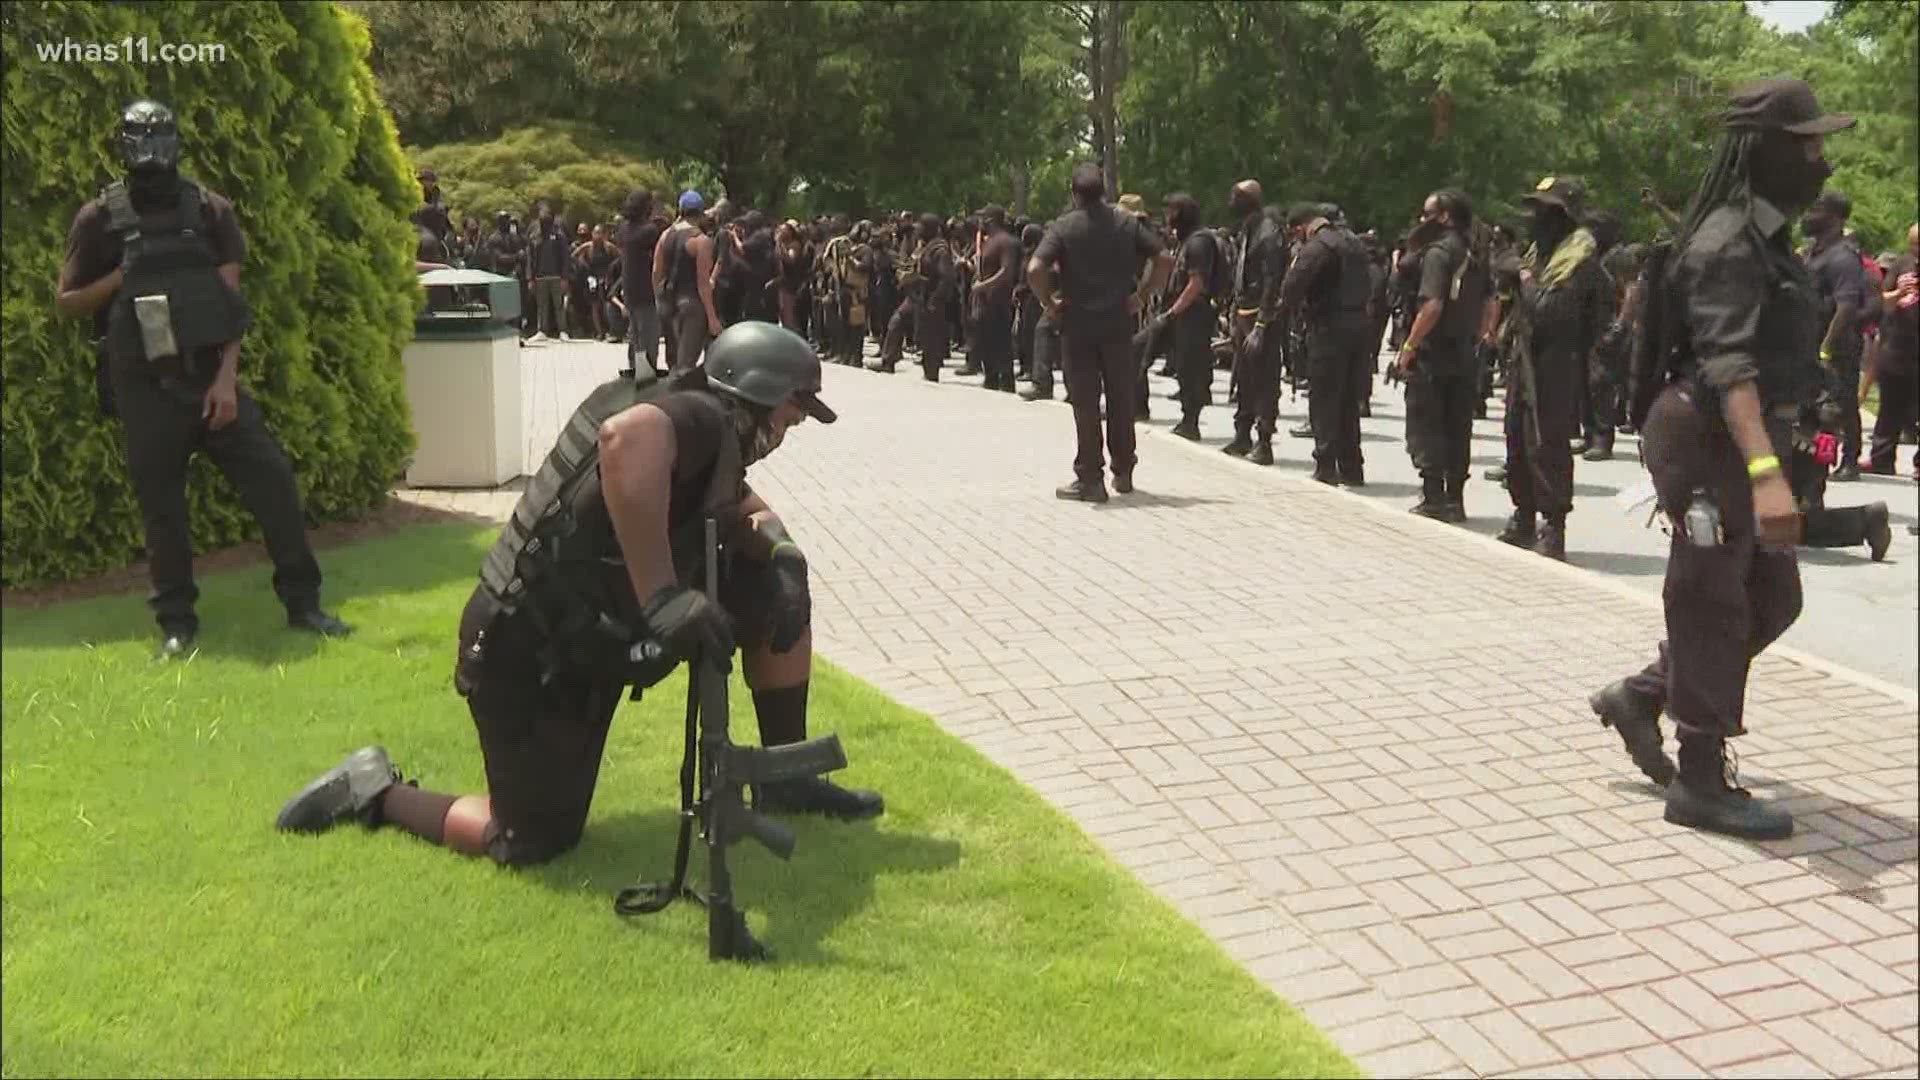 Police say they do not expect any violence this weekend as multiple groups say they plan to come to Louisville, including an armed Black militia group.